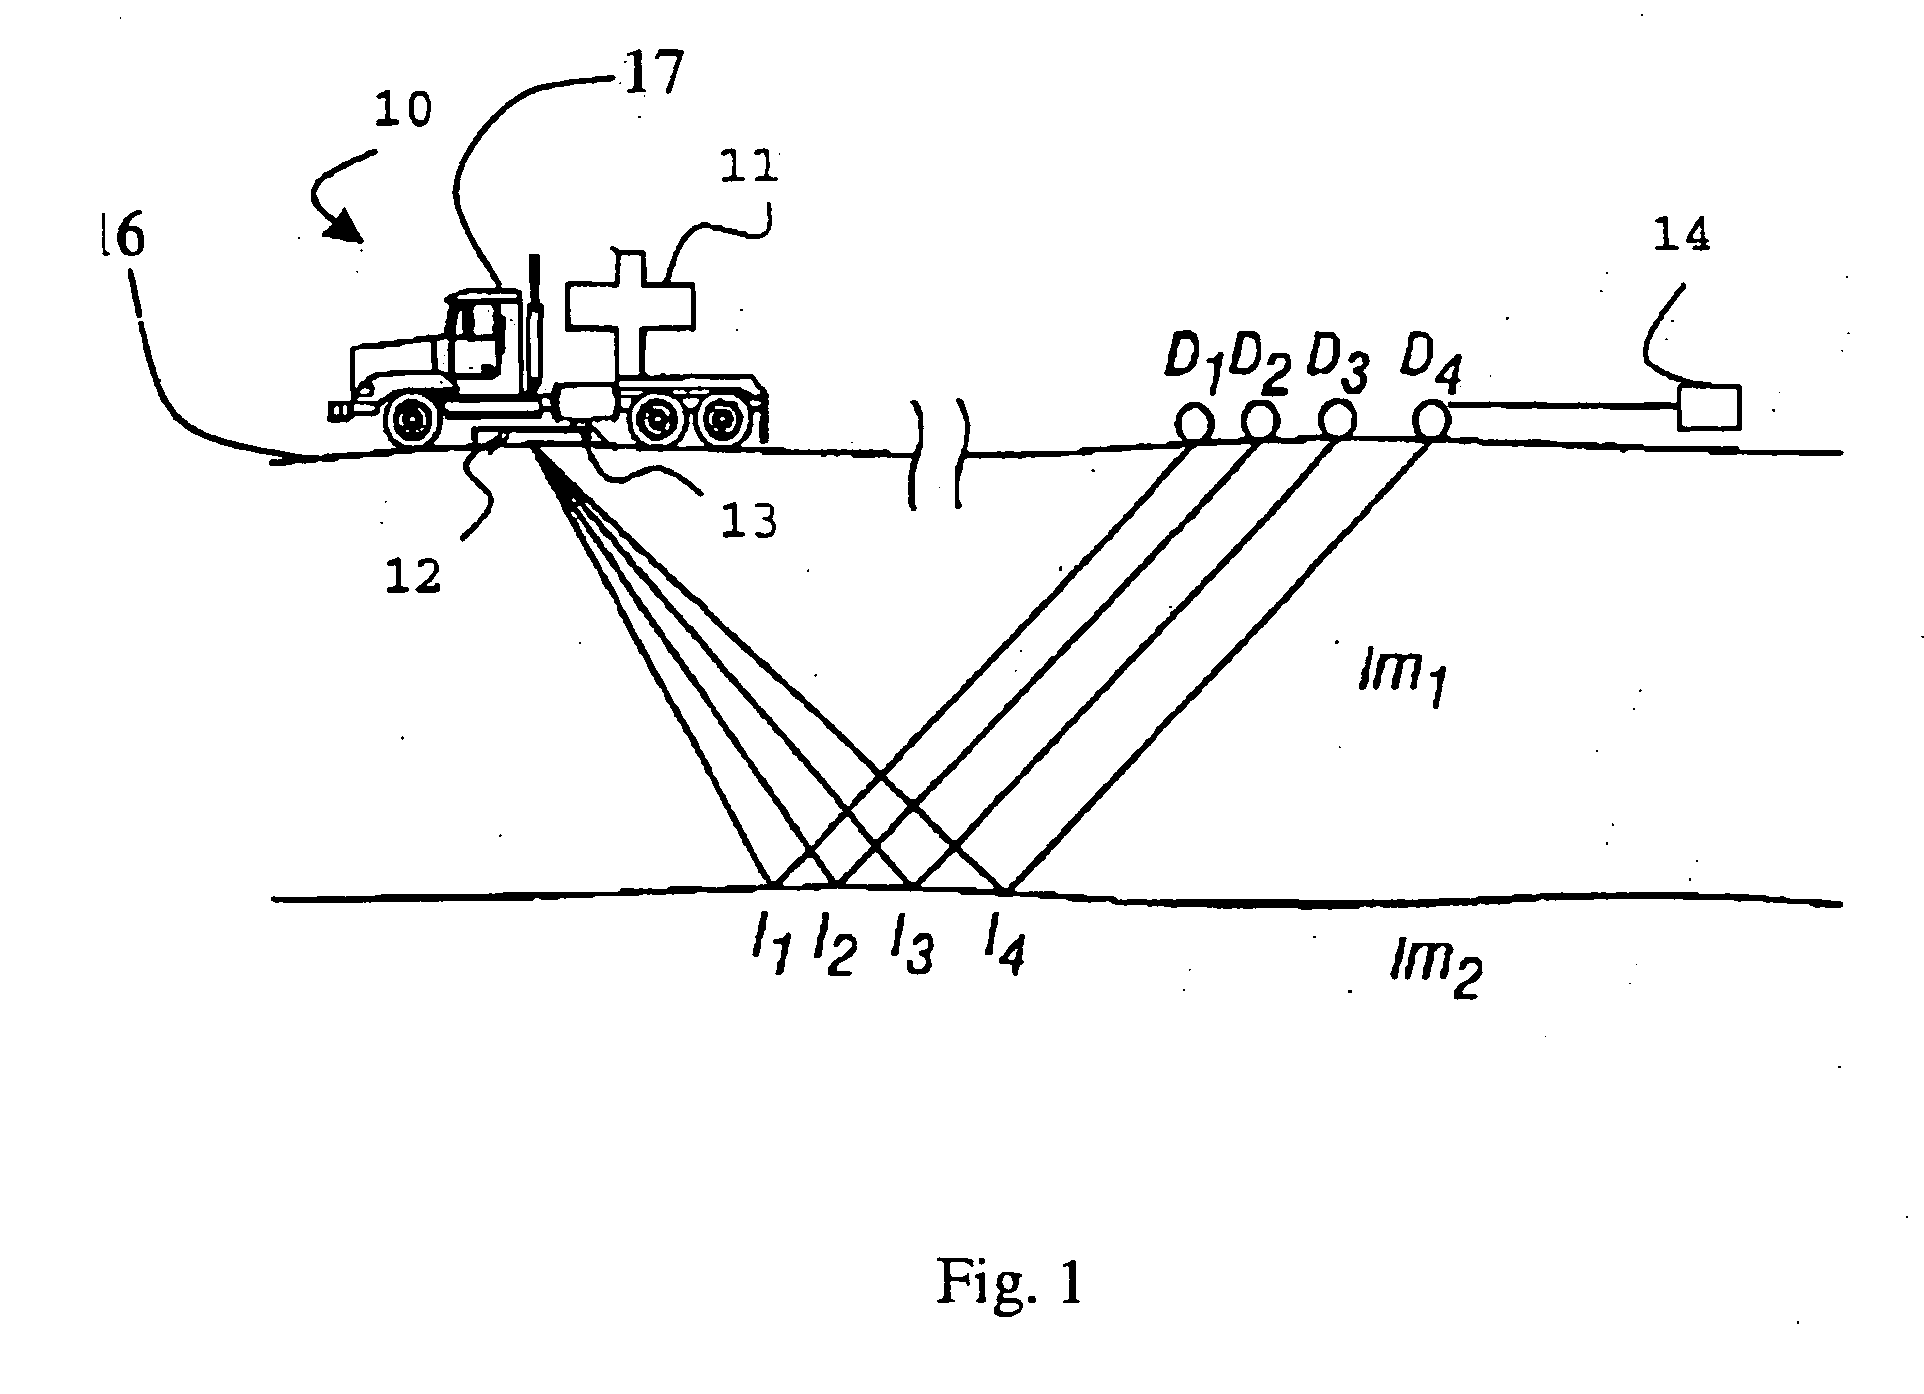 Systems and methods for enhancing low-frequency content in vibroseis acquisition